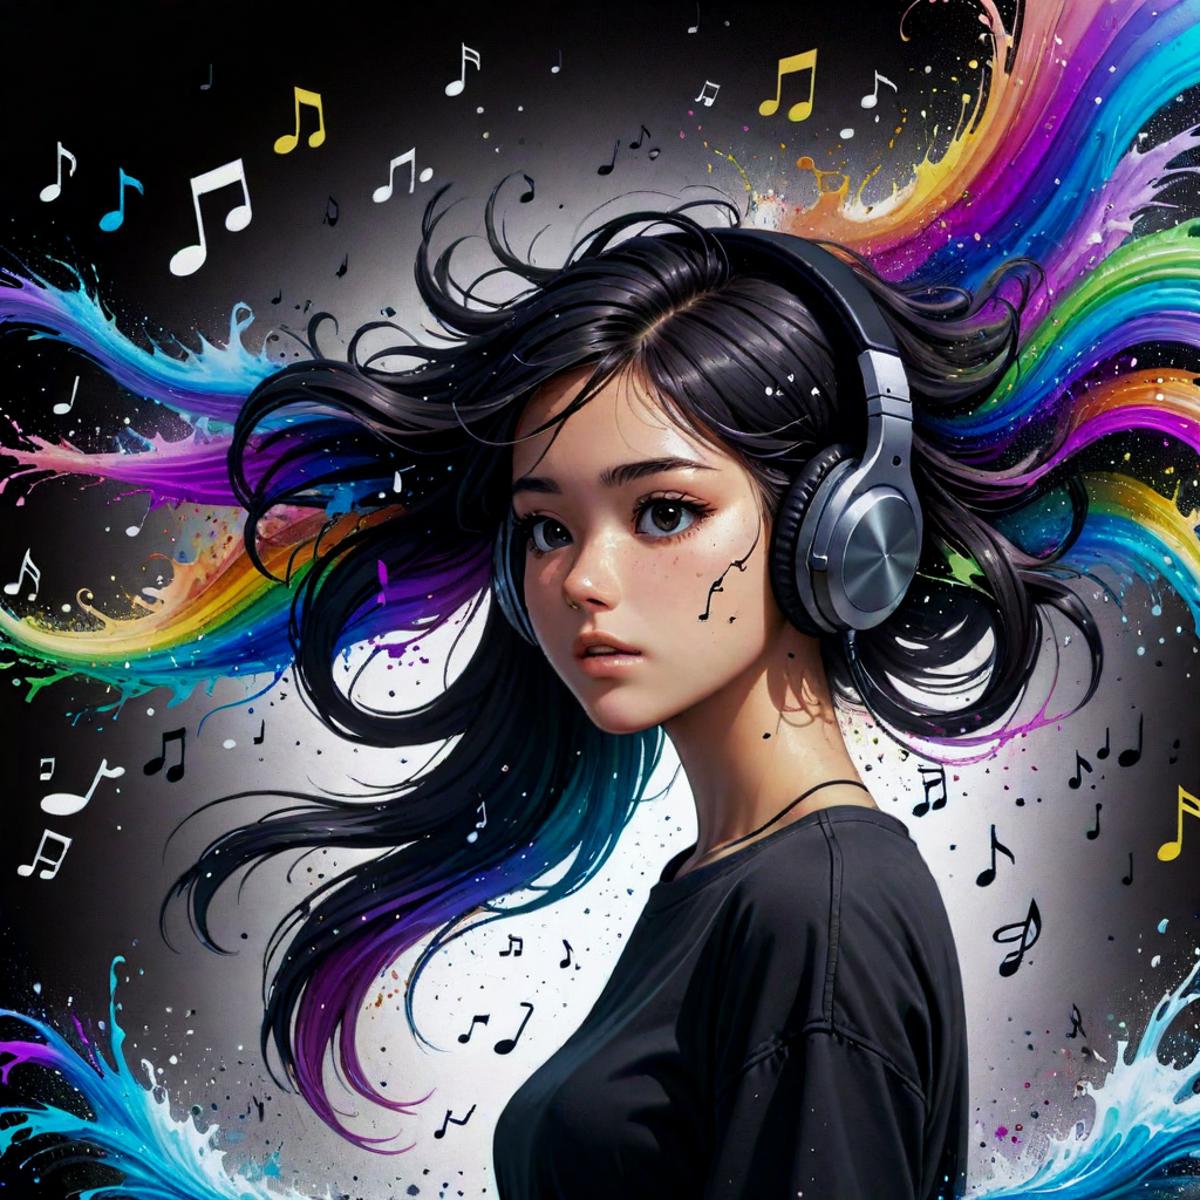 A woman with long hair and headphones on, surrounded by music notes.